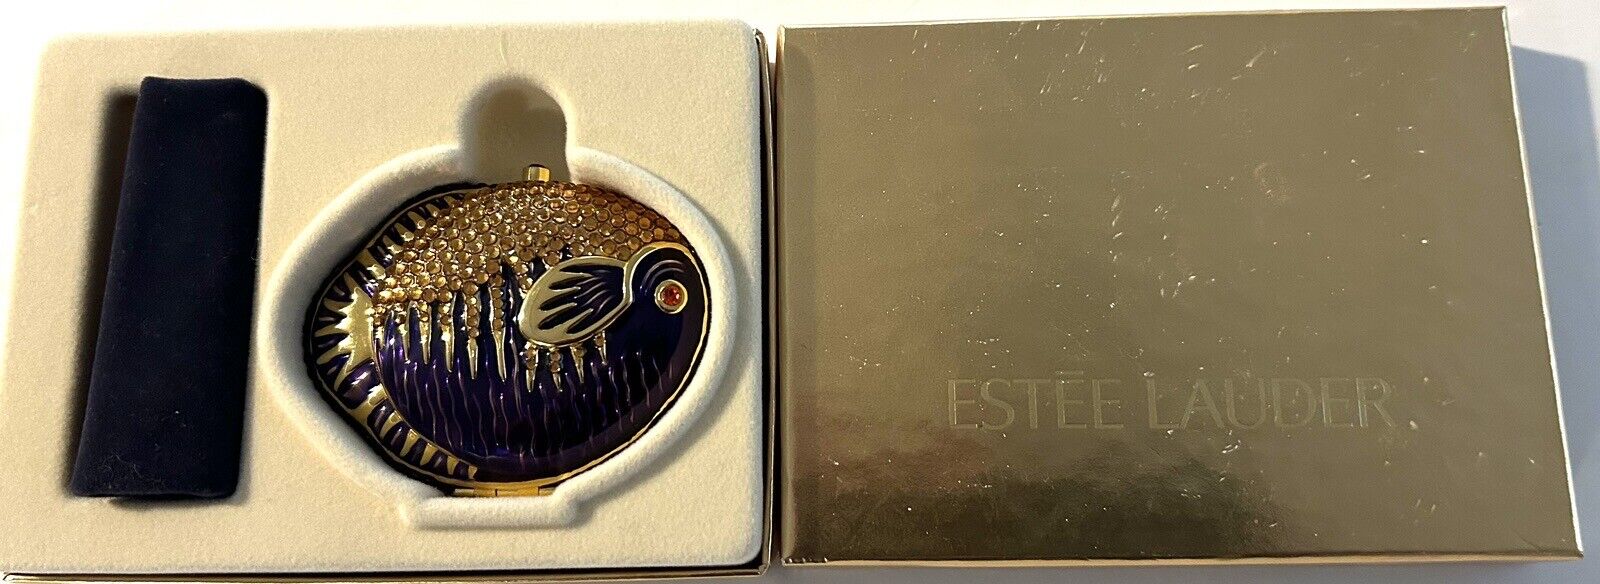 Estee Lauder Lucidity Powder ￼Crystal ￼& Enamel ￼Fish Compact New With Box ￼